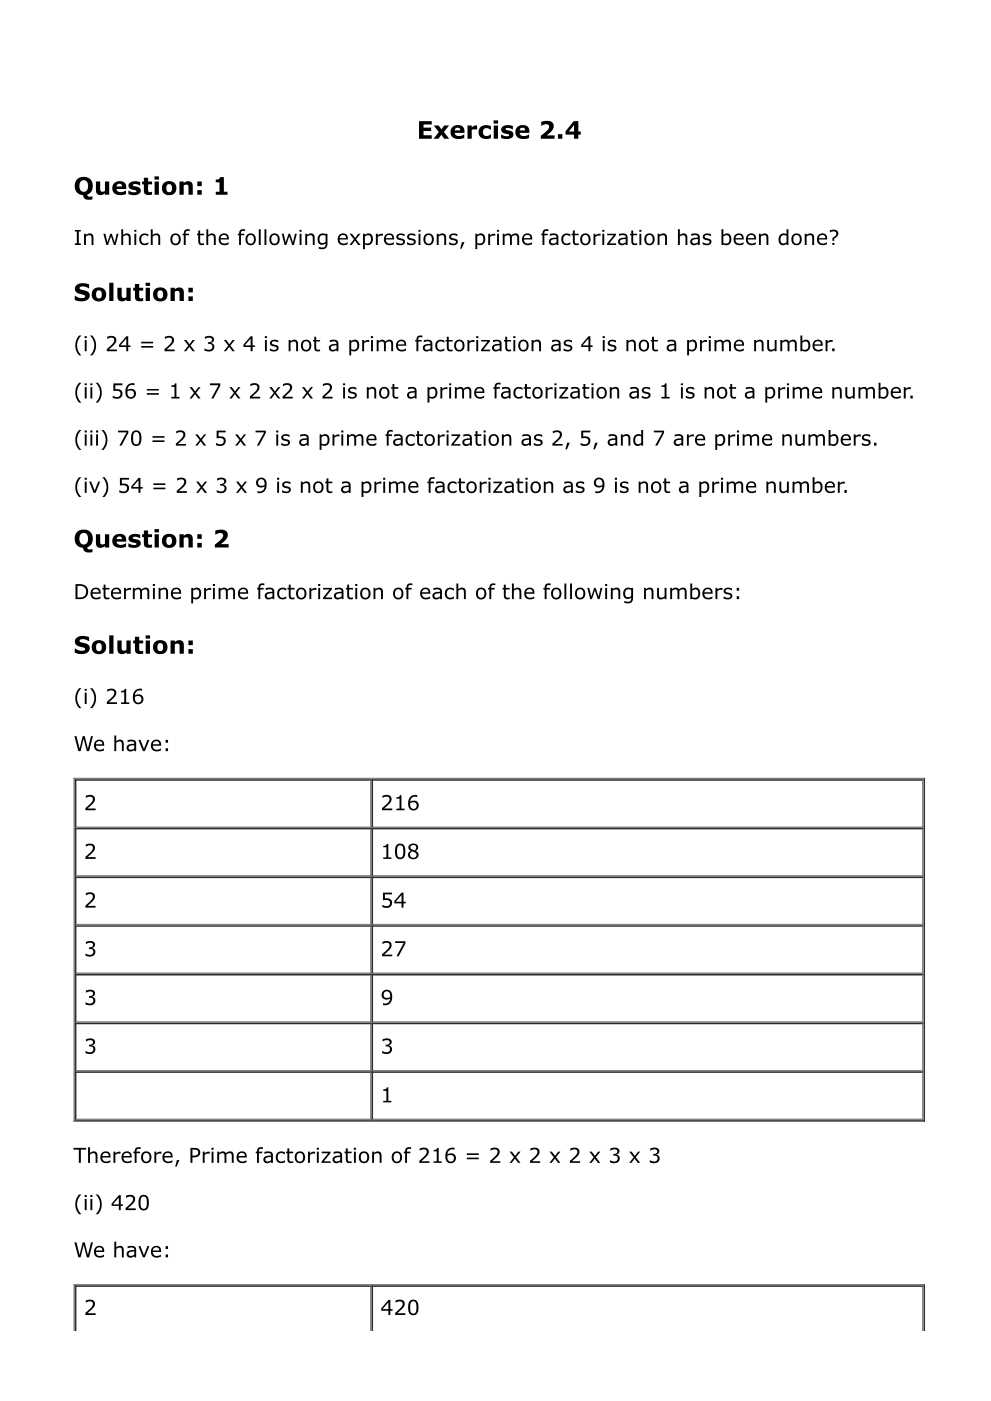 RD Sharma Solutions For Class 6 Maths Chapter 2